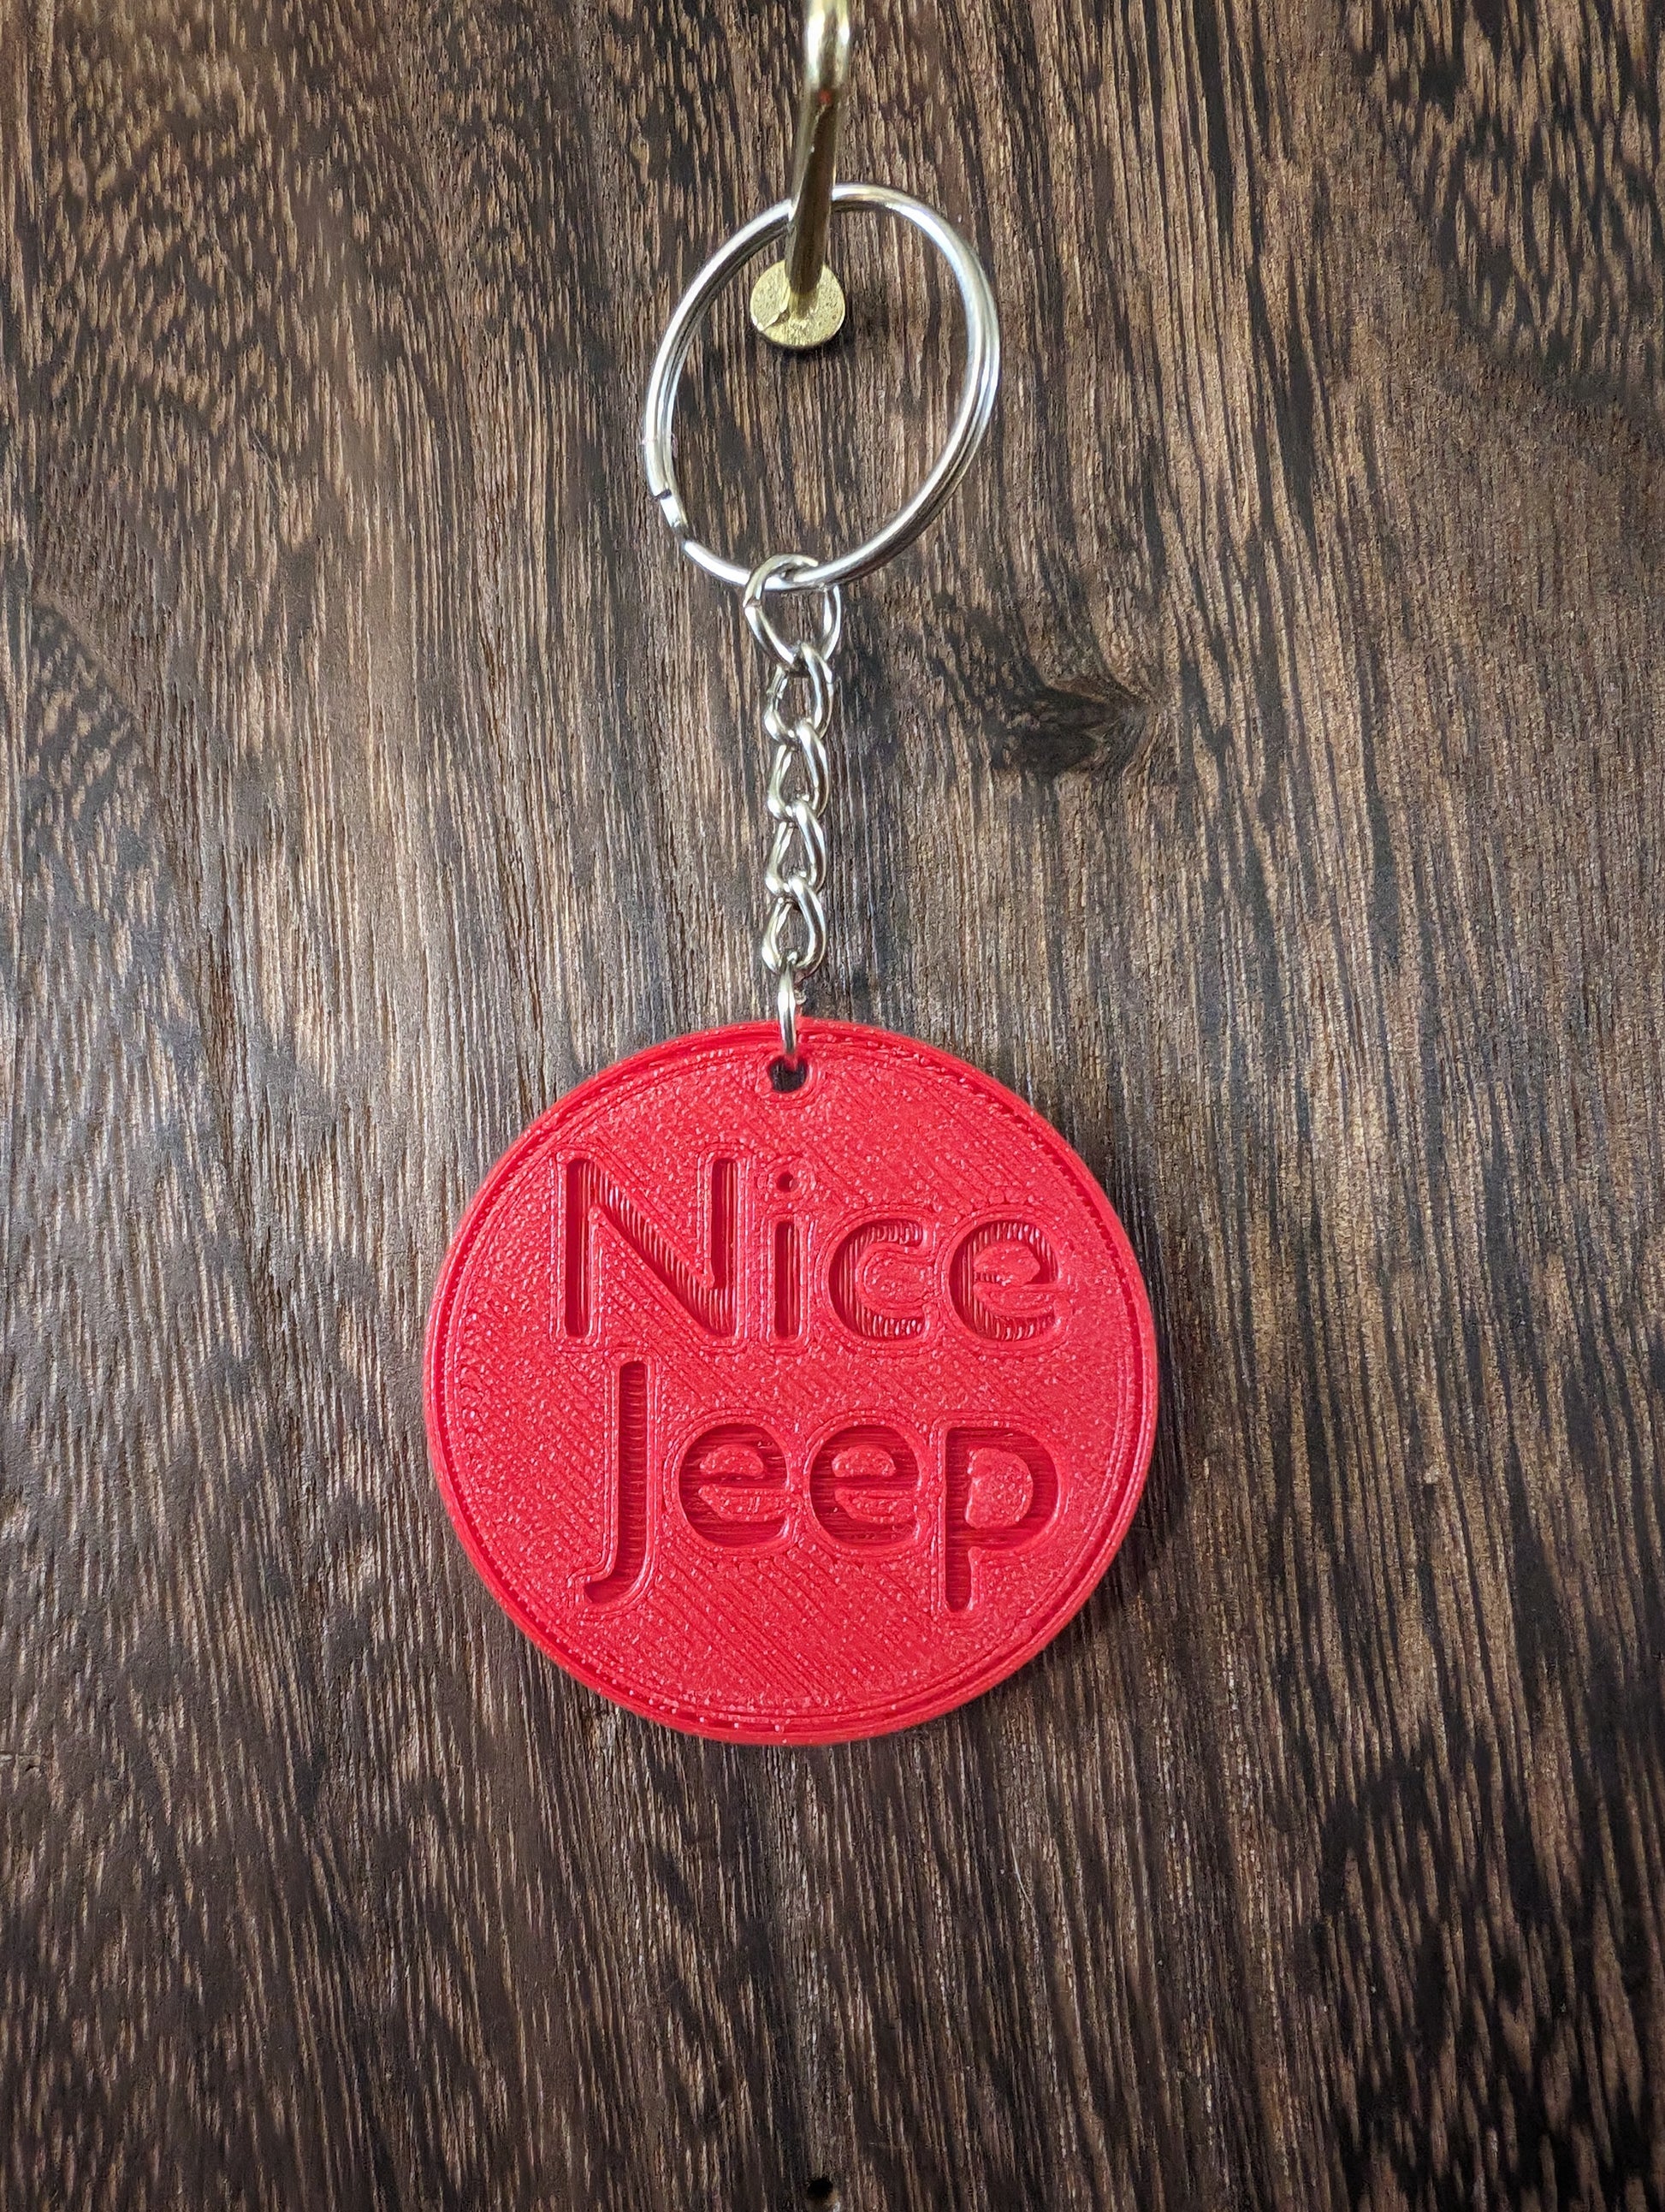 Duck, duck coin, jeep, jeepers, nice ride, nice Jeep, yellow, pink, red, green, purple